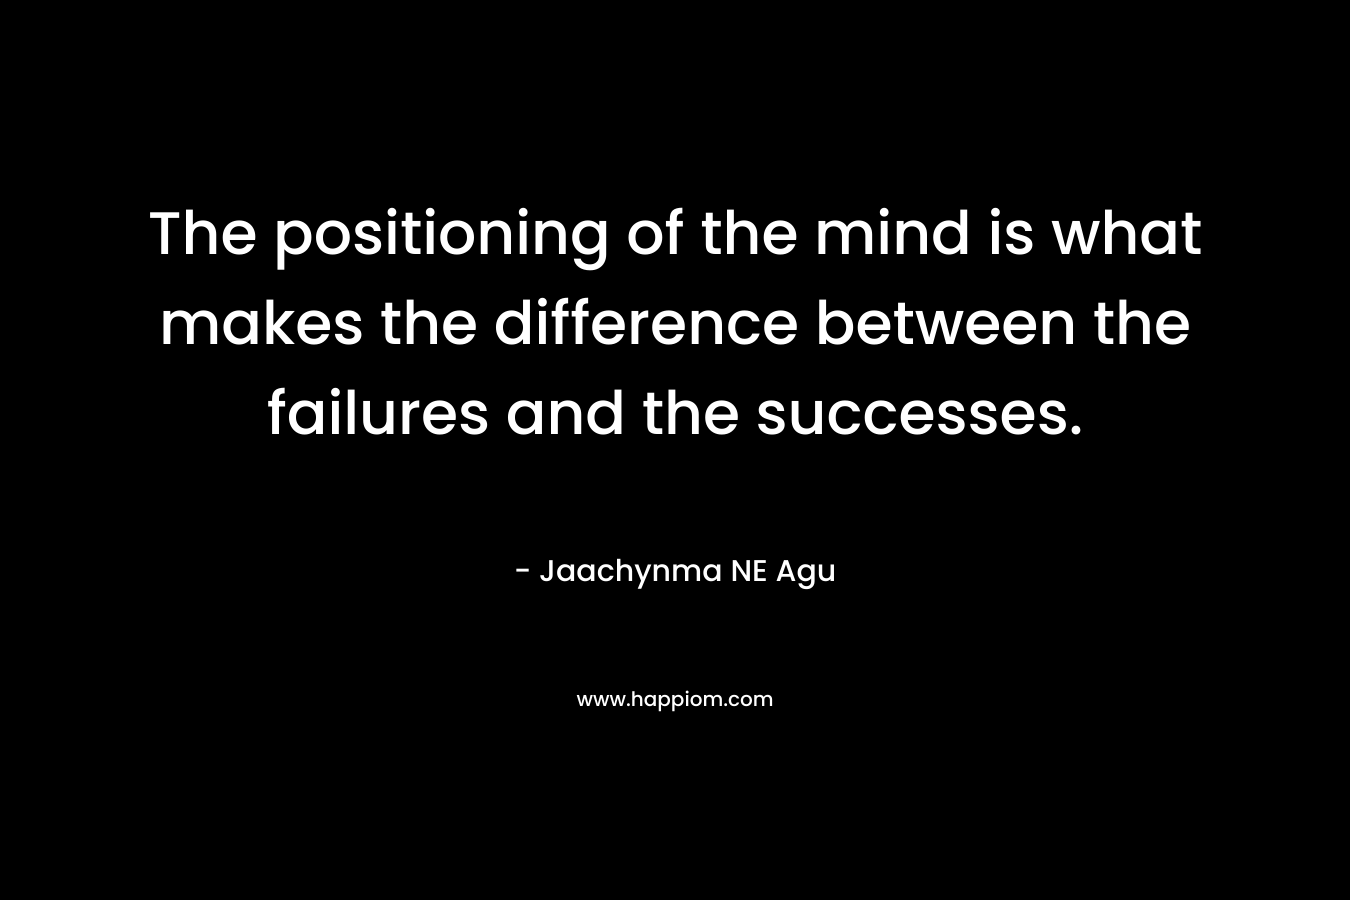 The positioning of the mind is what makes the difference between the failures and the successes. – Jaachynma NE Agu